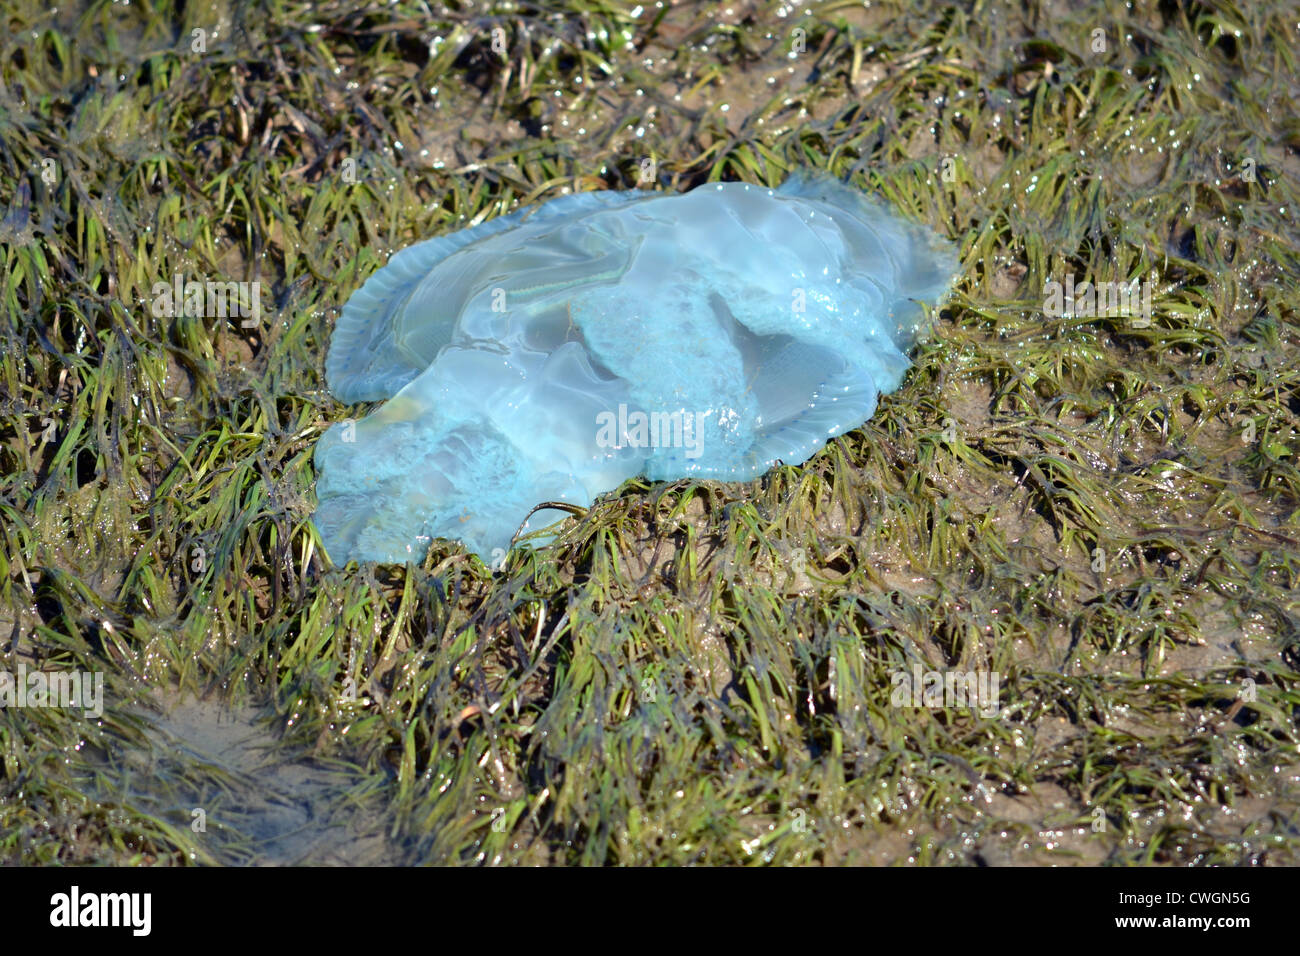 Blue Blubber (Catostylus mosaicus) Jellyfish washed up onto a weed bank at low tide Bribie Island, Queensland, Australia Stock Photo